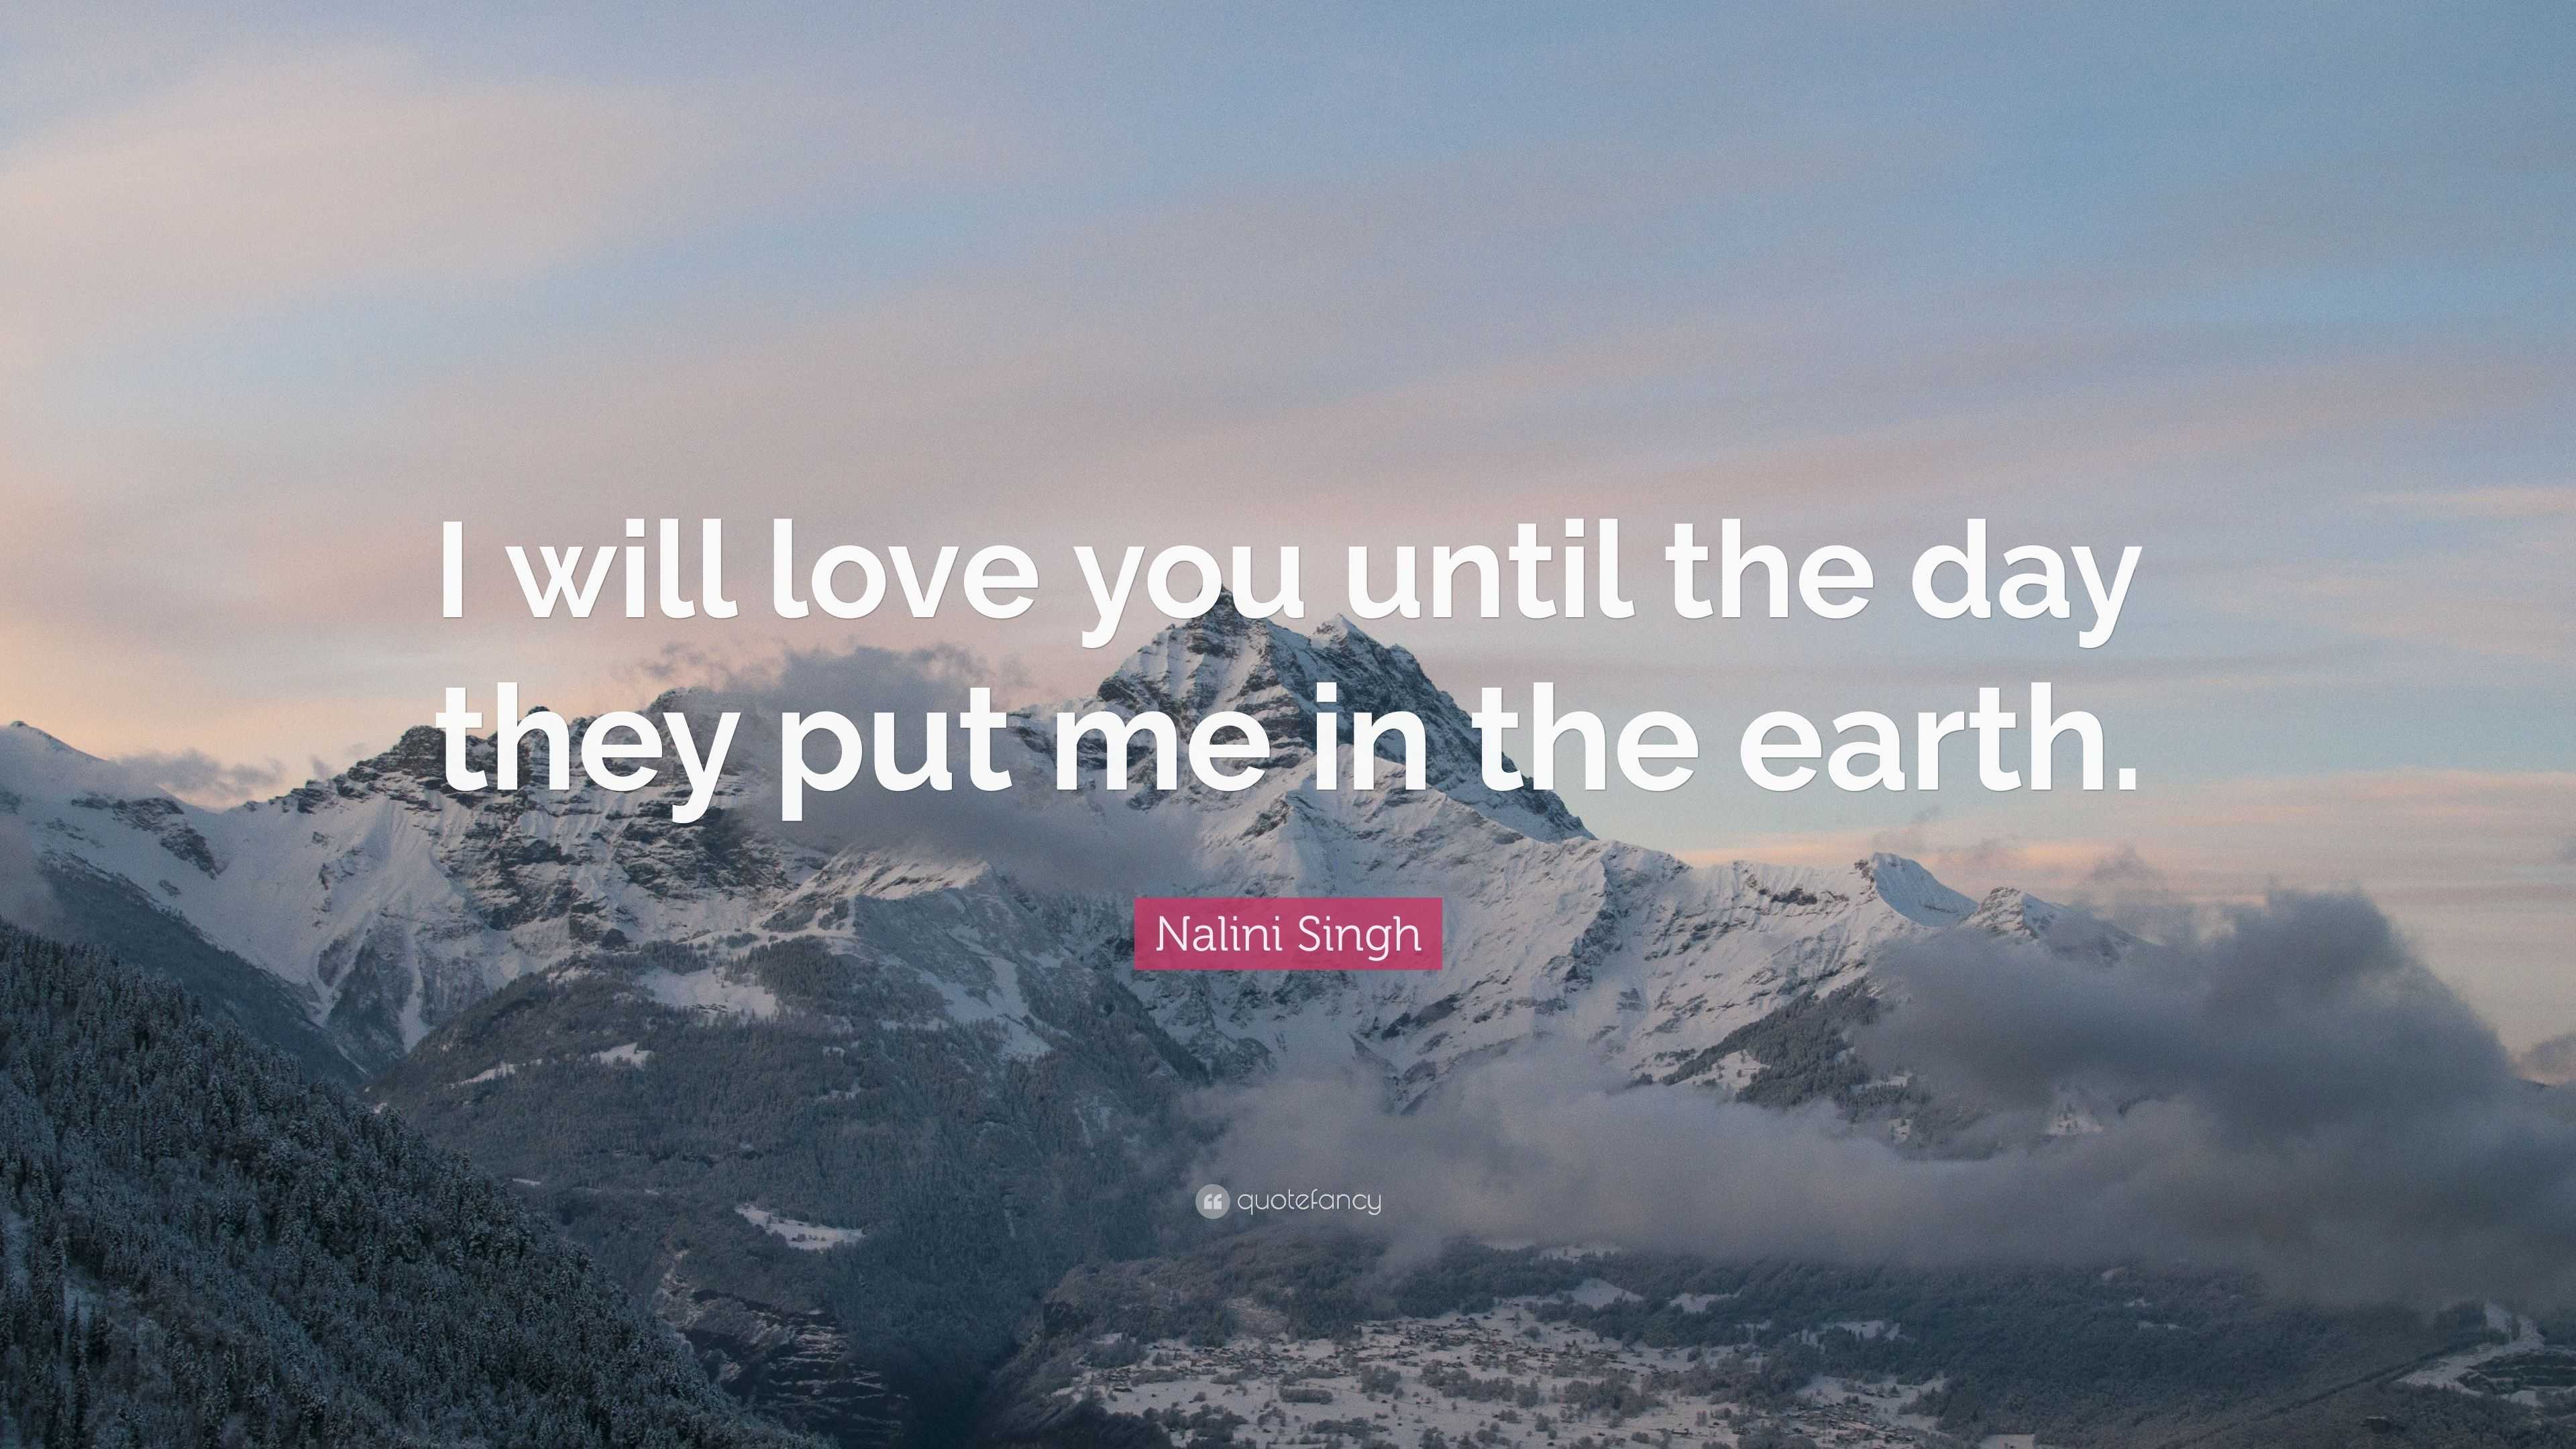 Nalini Singh Quote “I will love you until the day they put me in